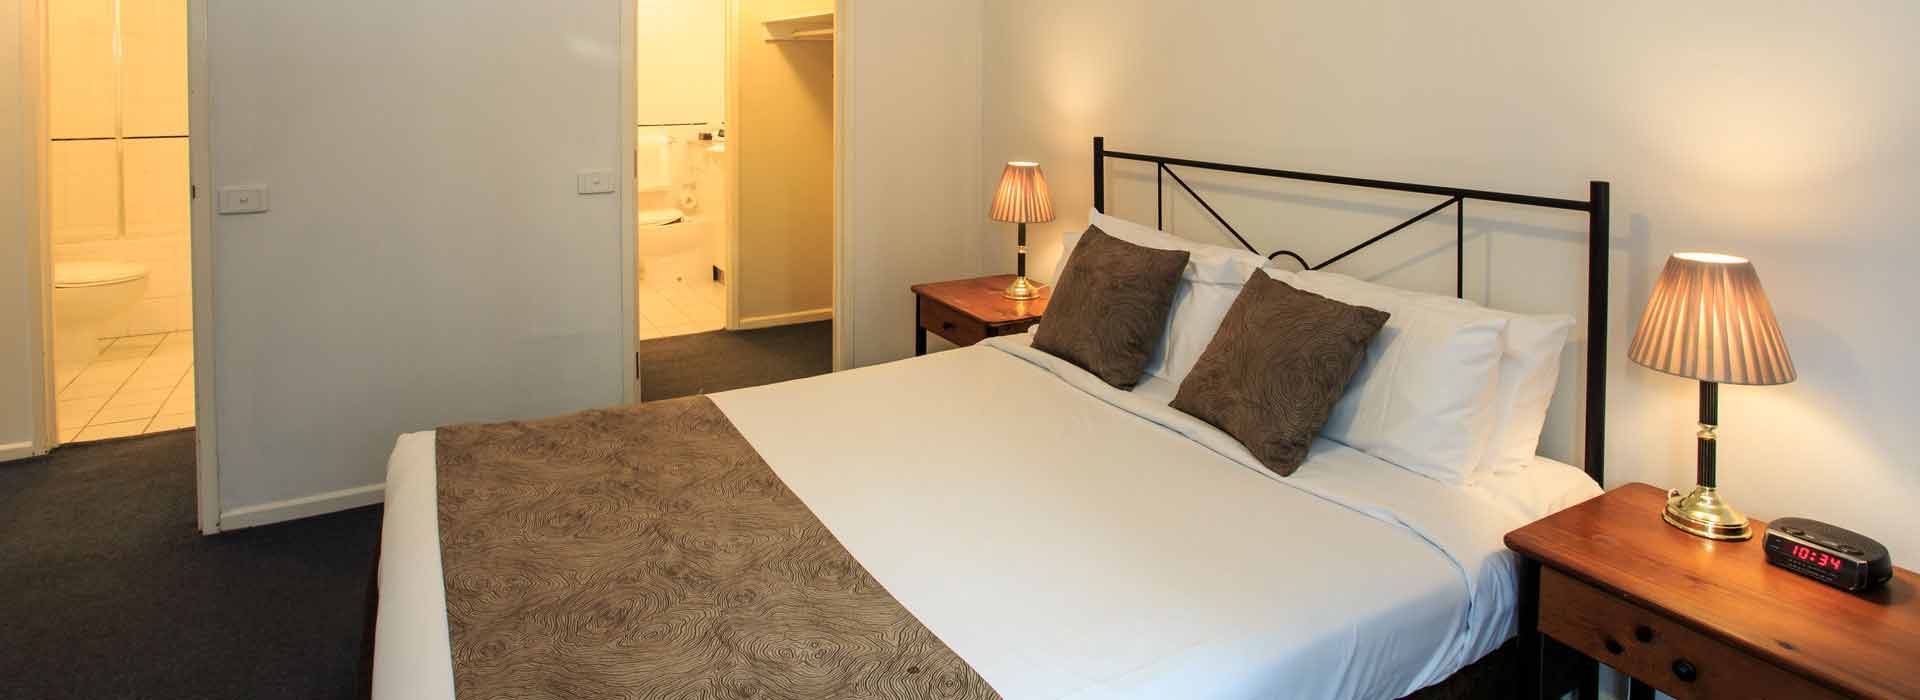 Melbourne 3 Bedroom Apartments Paramount Serviced Apartments